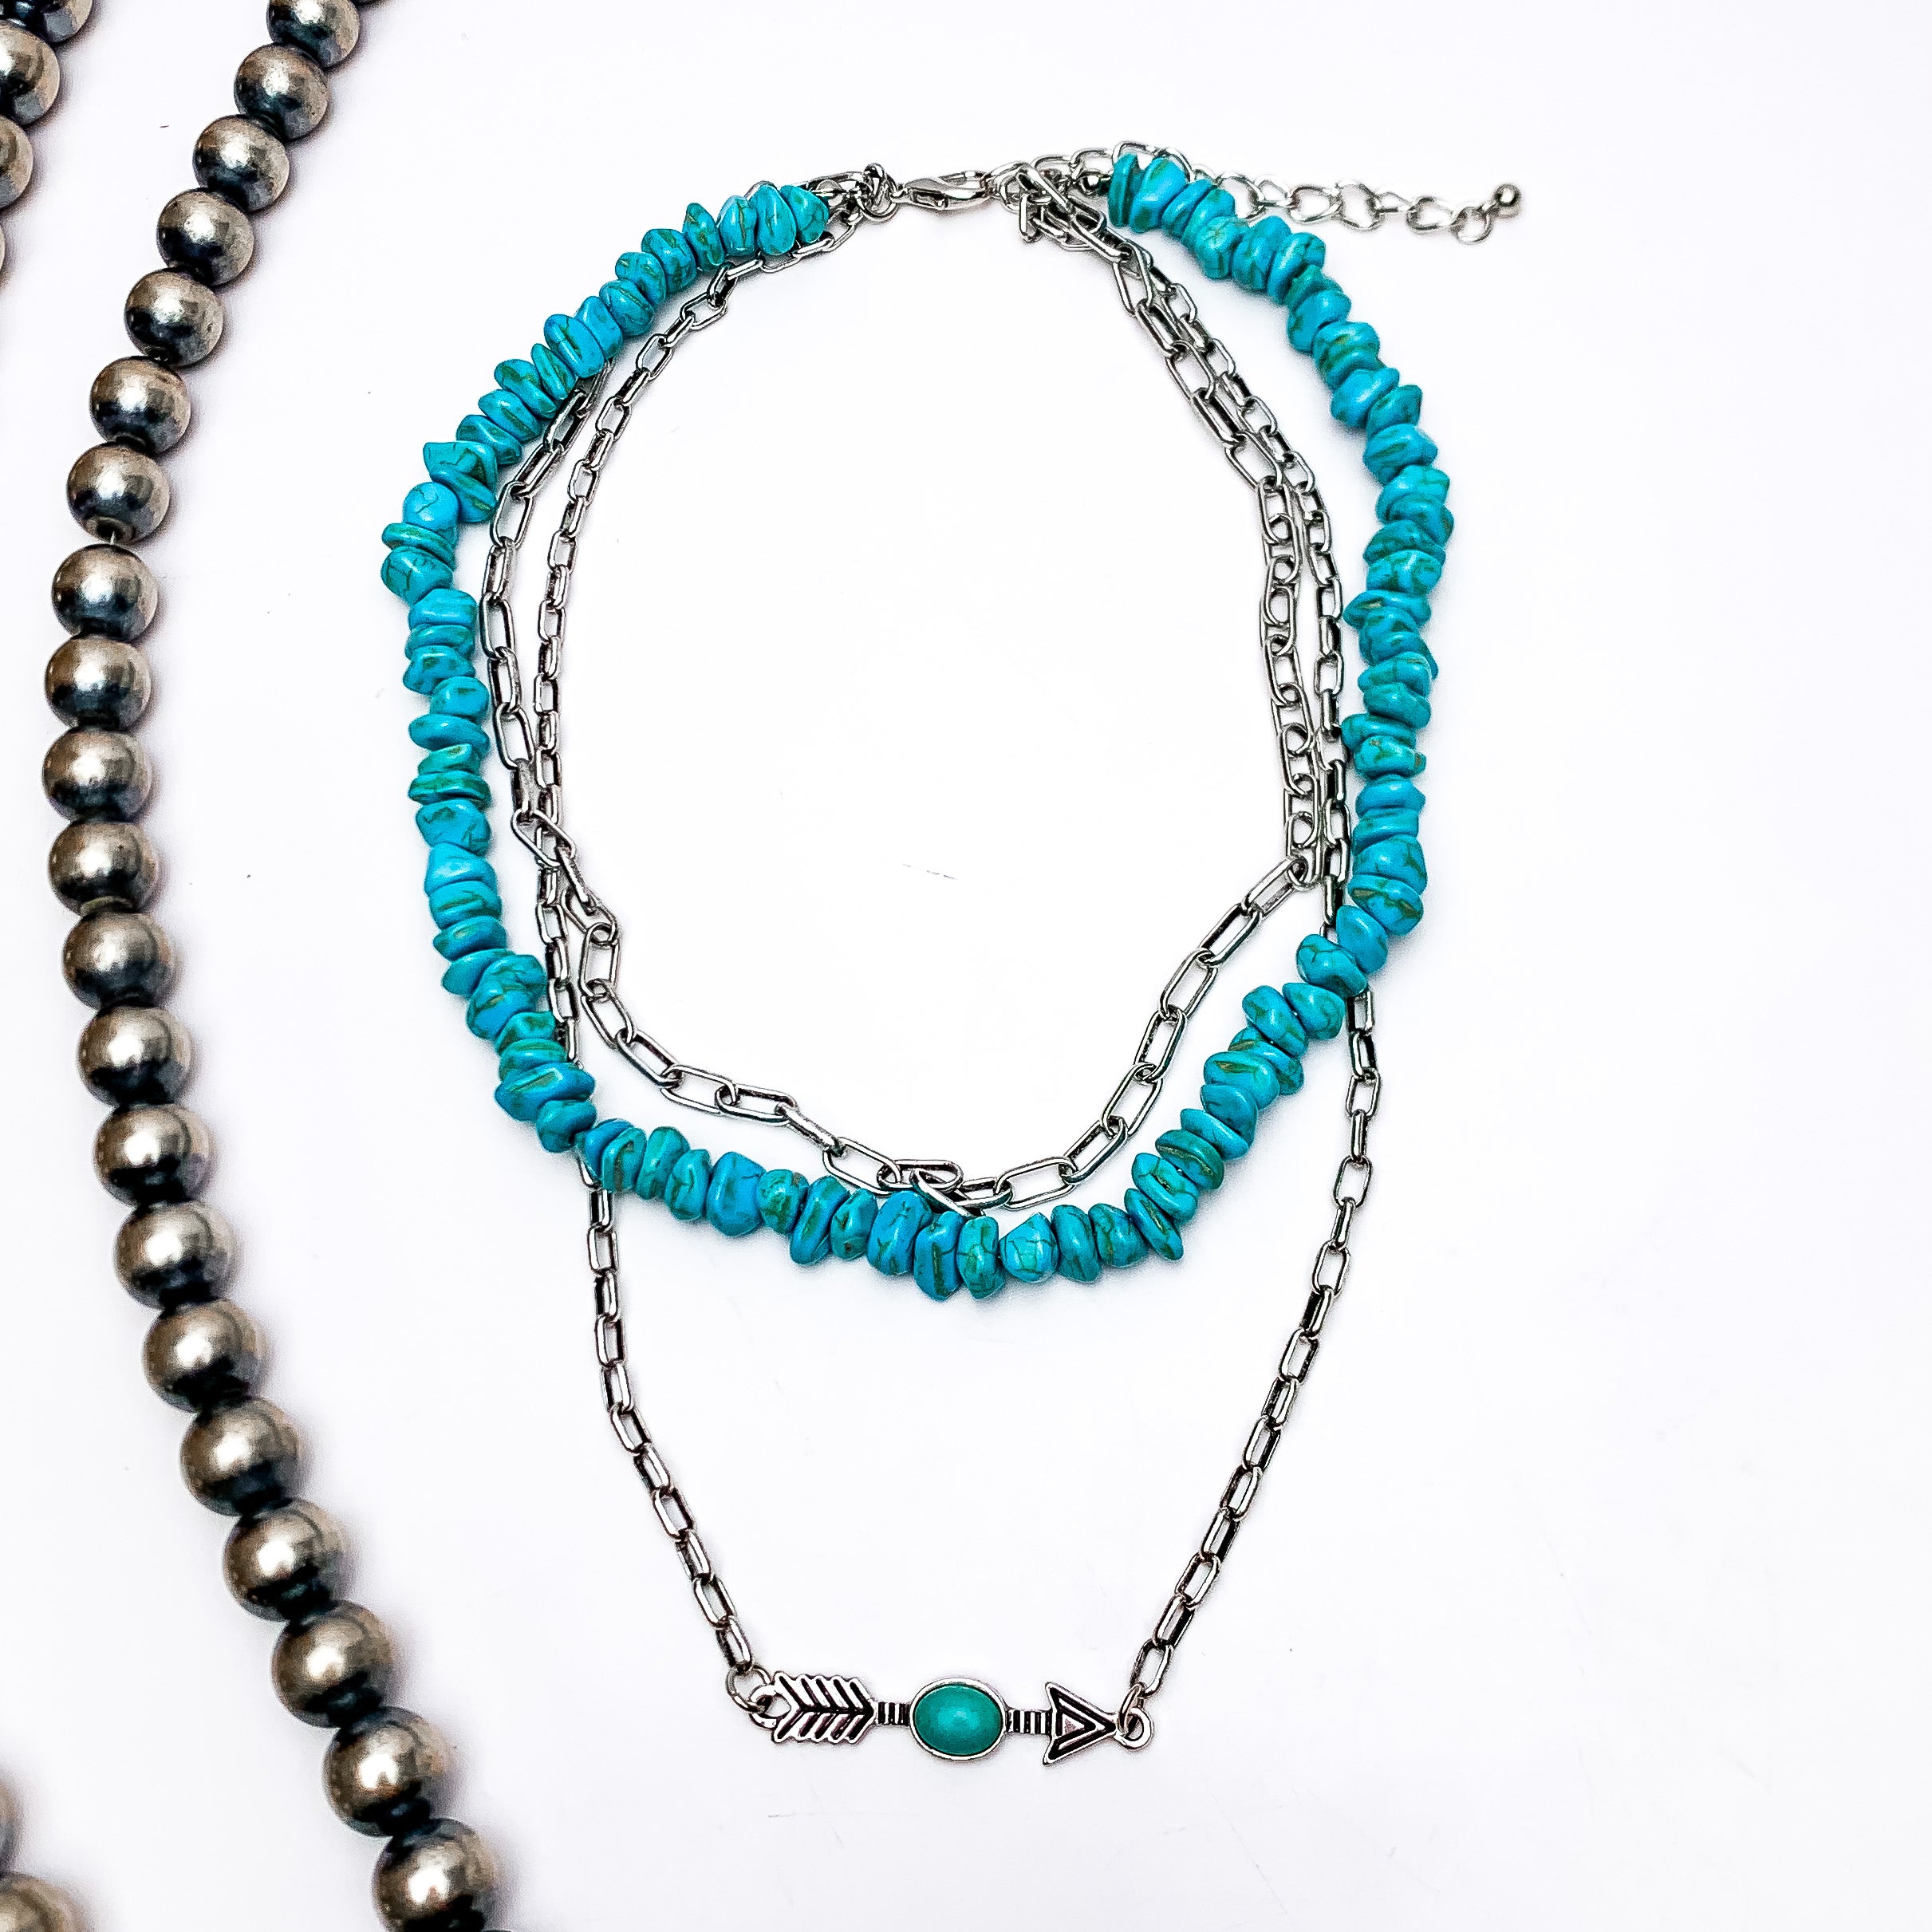 Triple Strand Silver Tone and Turquoise Necklace With an Arrow Charm. This necklace is on a white background with Navajo pearls on the left side for decoration.